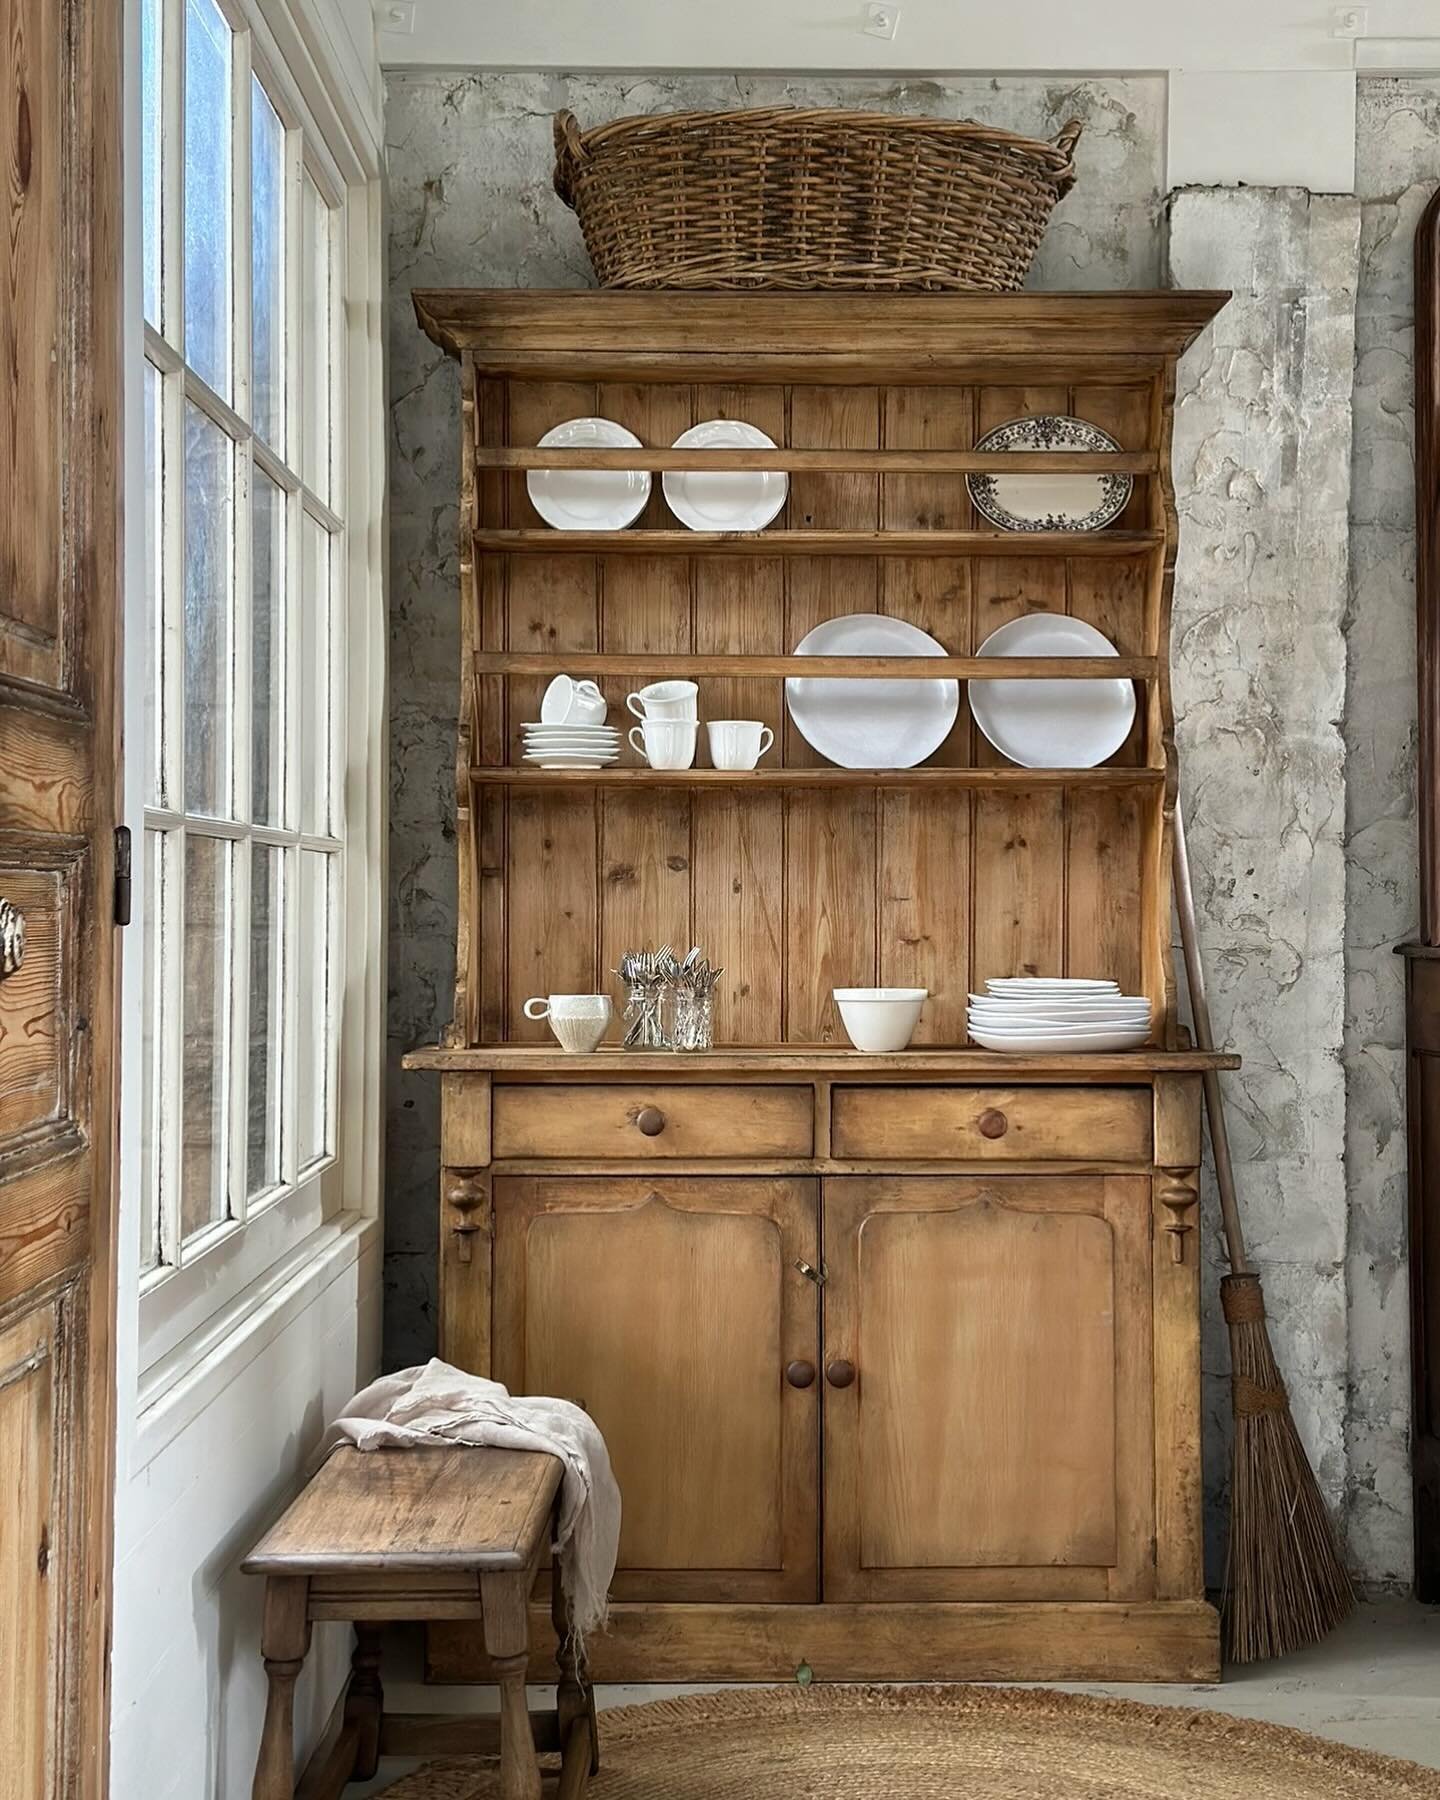 Our favourite piece this week and it&rsquo;s overflowing with character and charm. 

This vintage pine kitchen dresser has three shelves and provides ample space for displaying and storing your collection of crockery and linen napery. It&rsquo;s a re